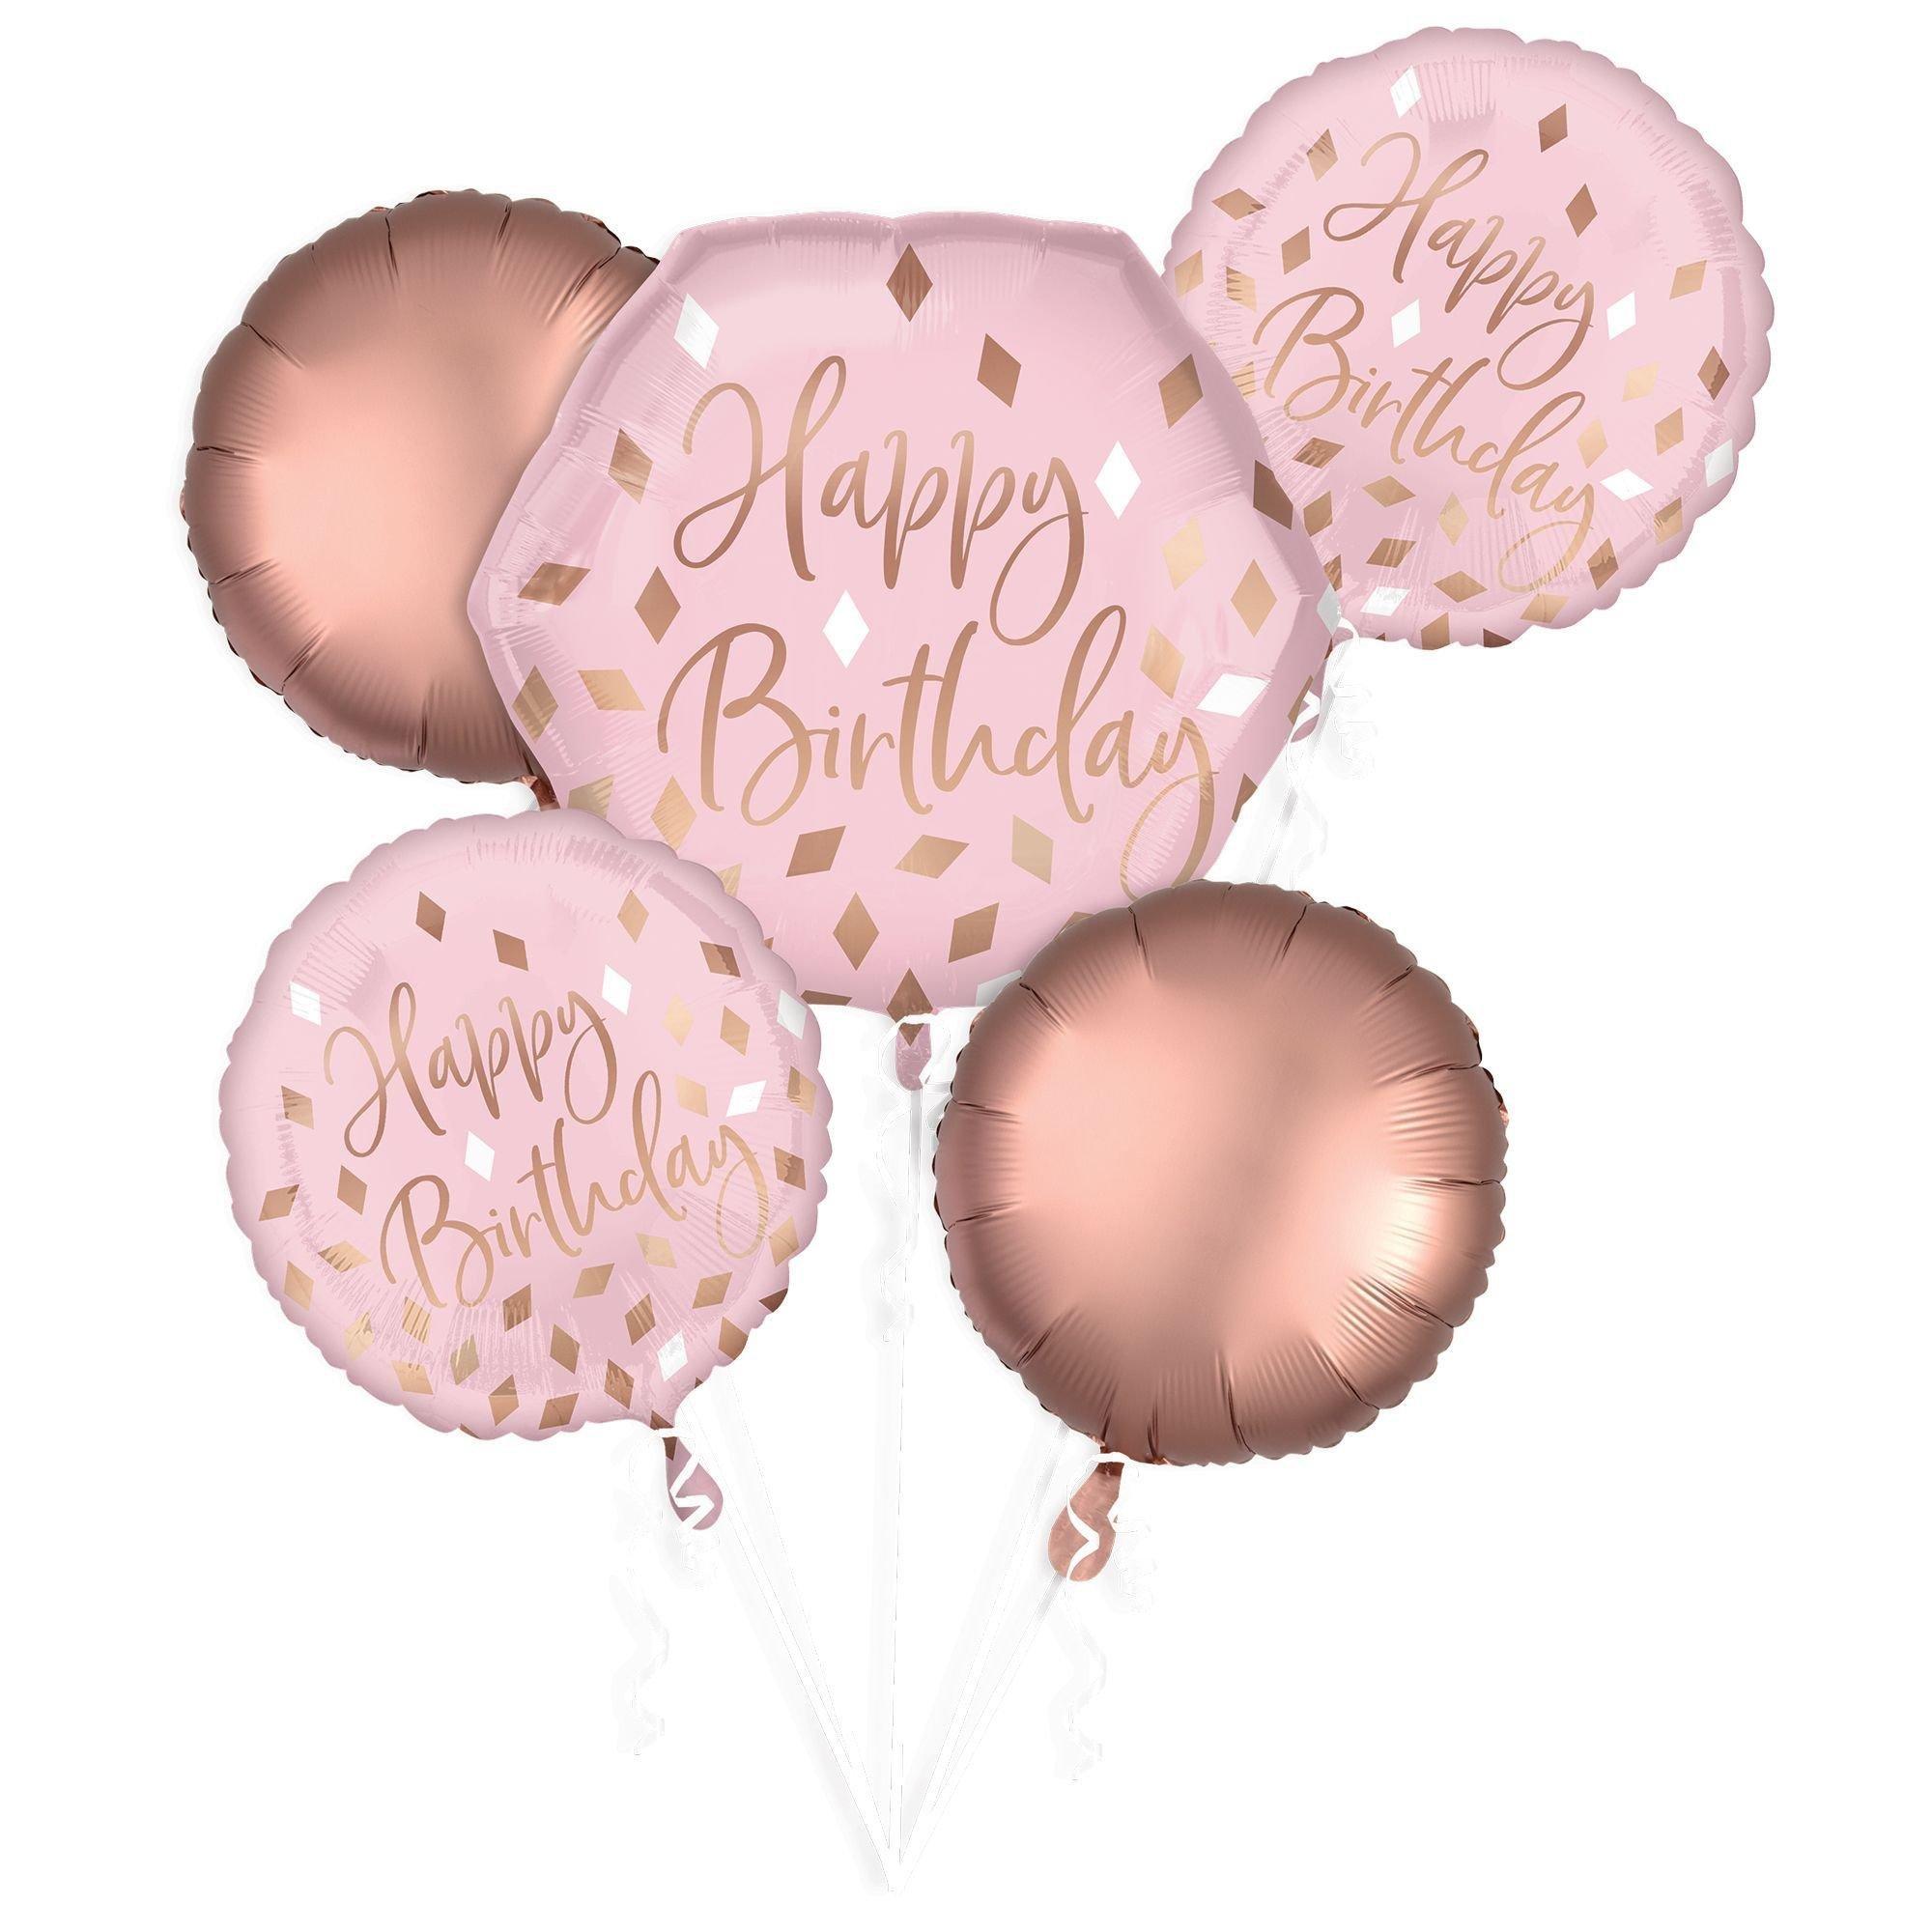 Happy birthday balloon set forgirls and women. Pack of 9 alumium foil  balloons. Birthday balloons for all ages. (Pink)